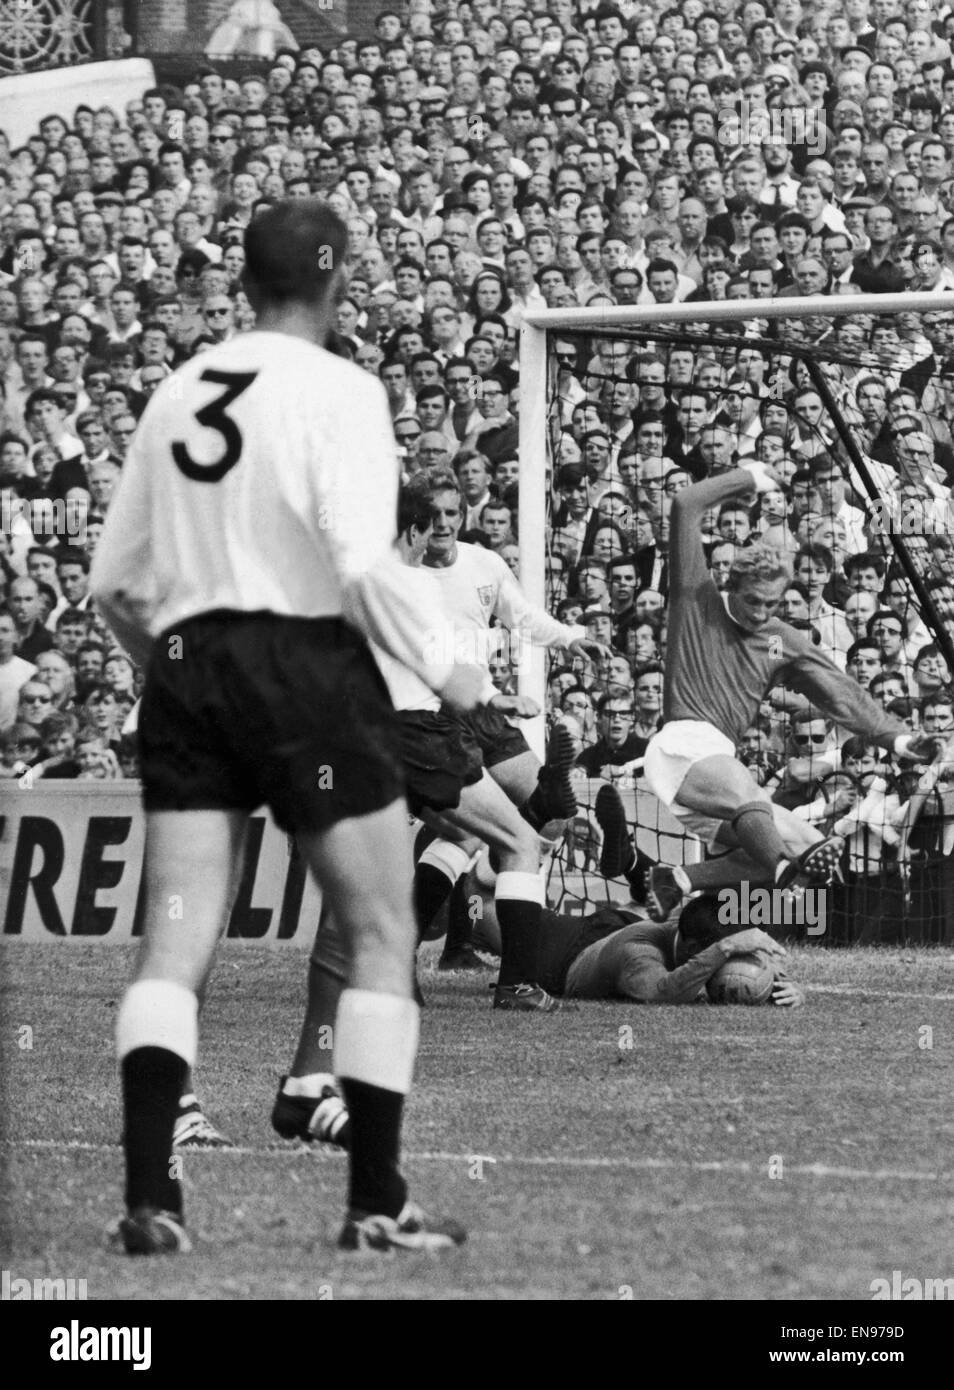 English League Division One match at Craven Cottage. Fulham 2 v. Manchester United 1. Denis Law of Manchester United dives over the Fulham goalkeeper Tony Macedo. 5th September 1964. Stock Photo